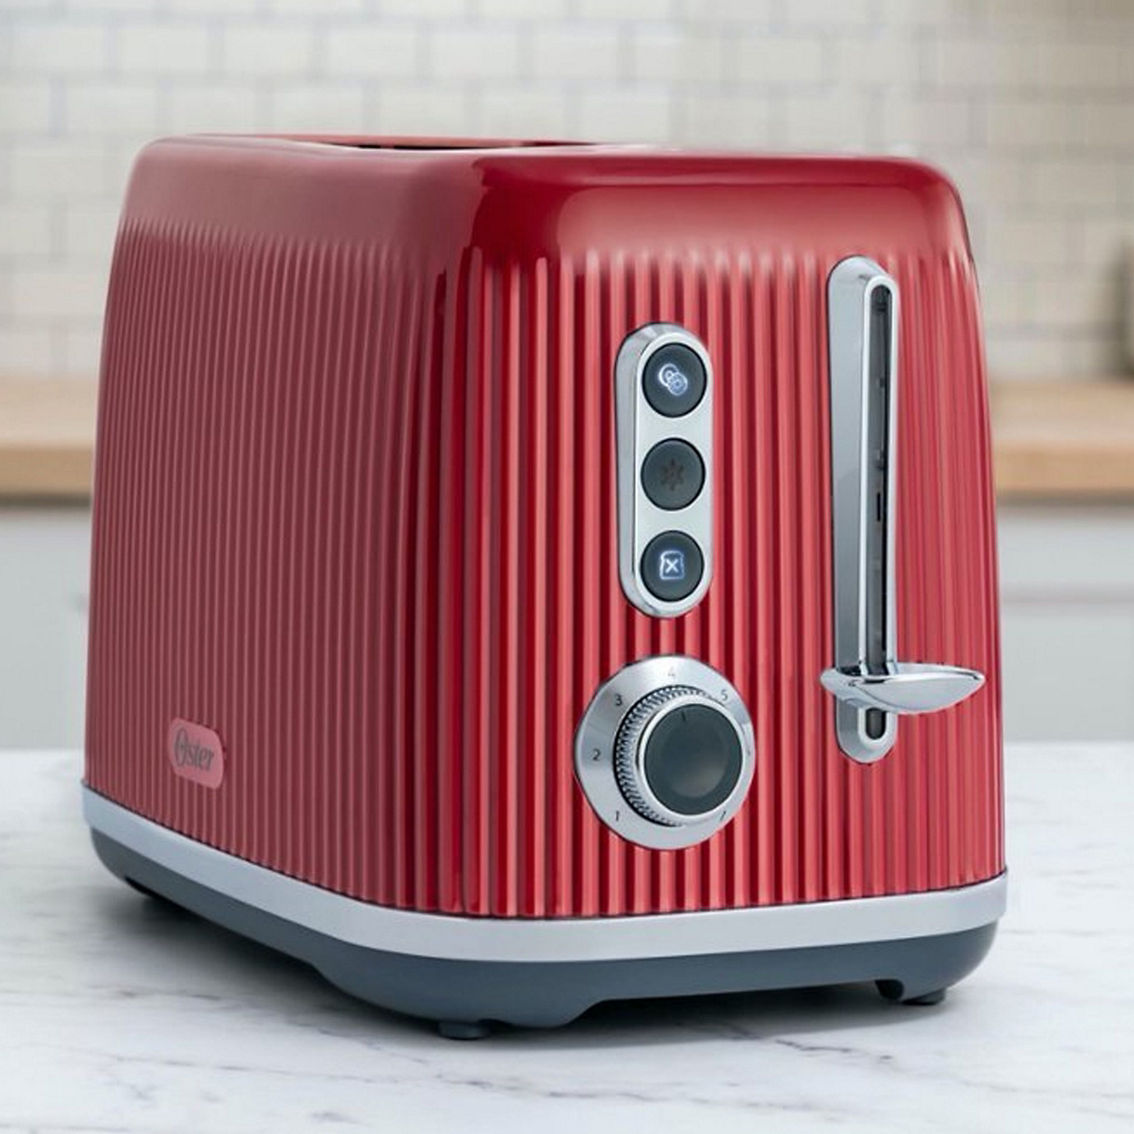 Oster Retro 2 Slice Toaster with Extra Wide Slots in Red - Image 2 of 3